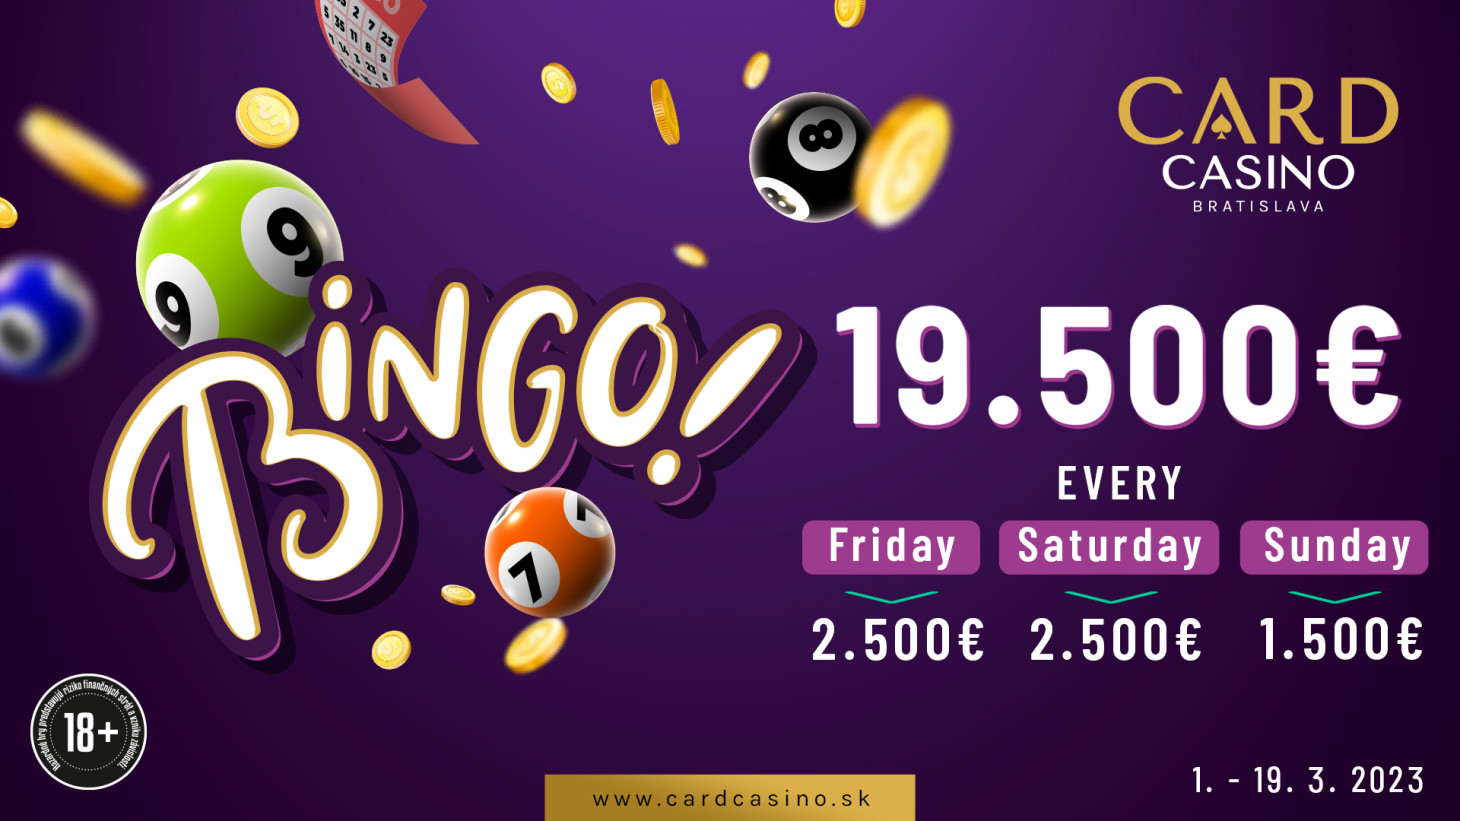 March in Card Casino is BINGO! Jackpots and Tombola also bring winnings